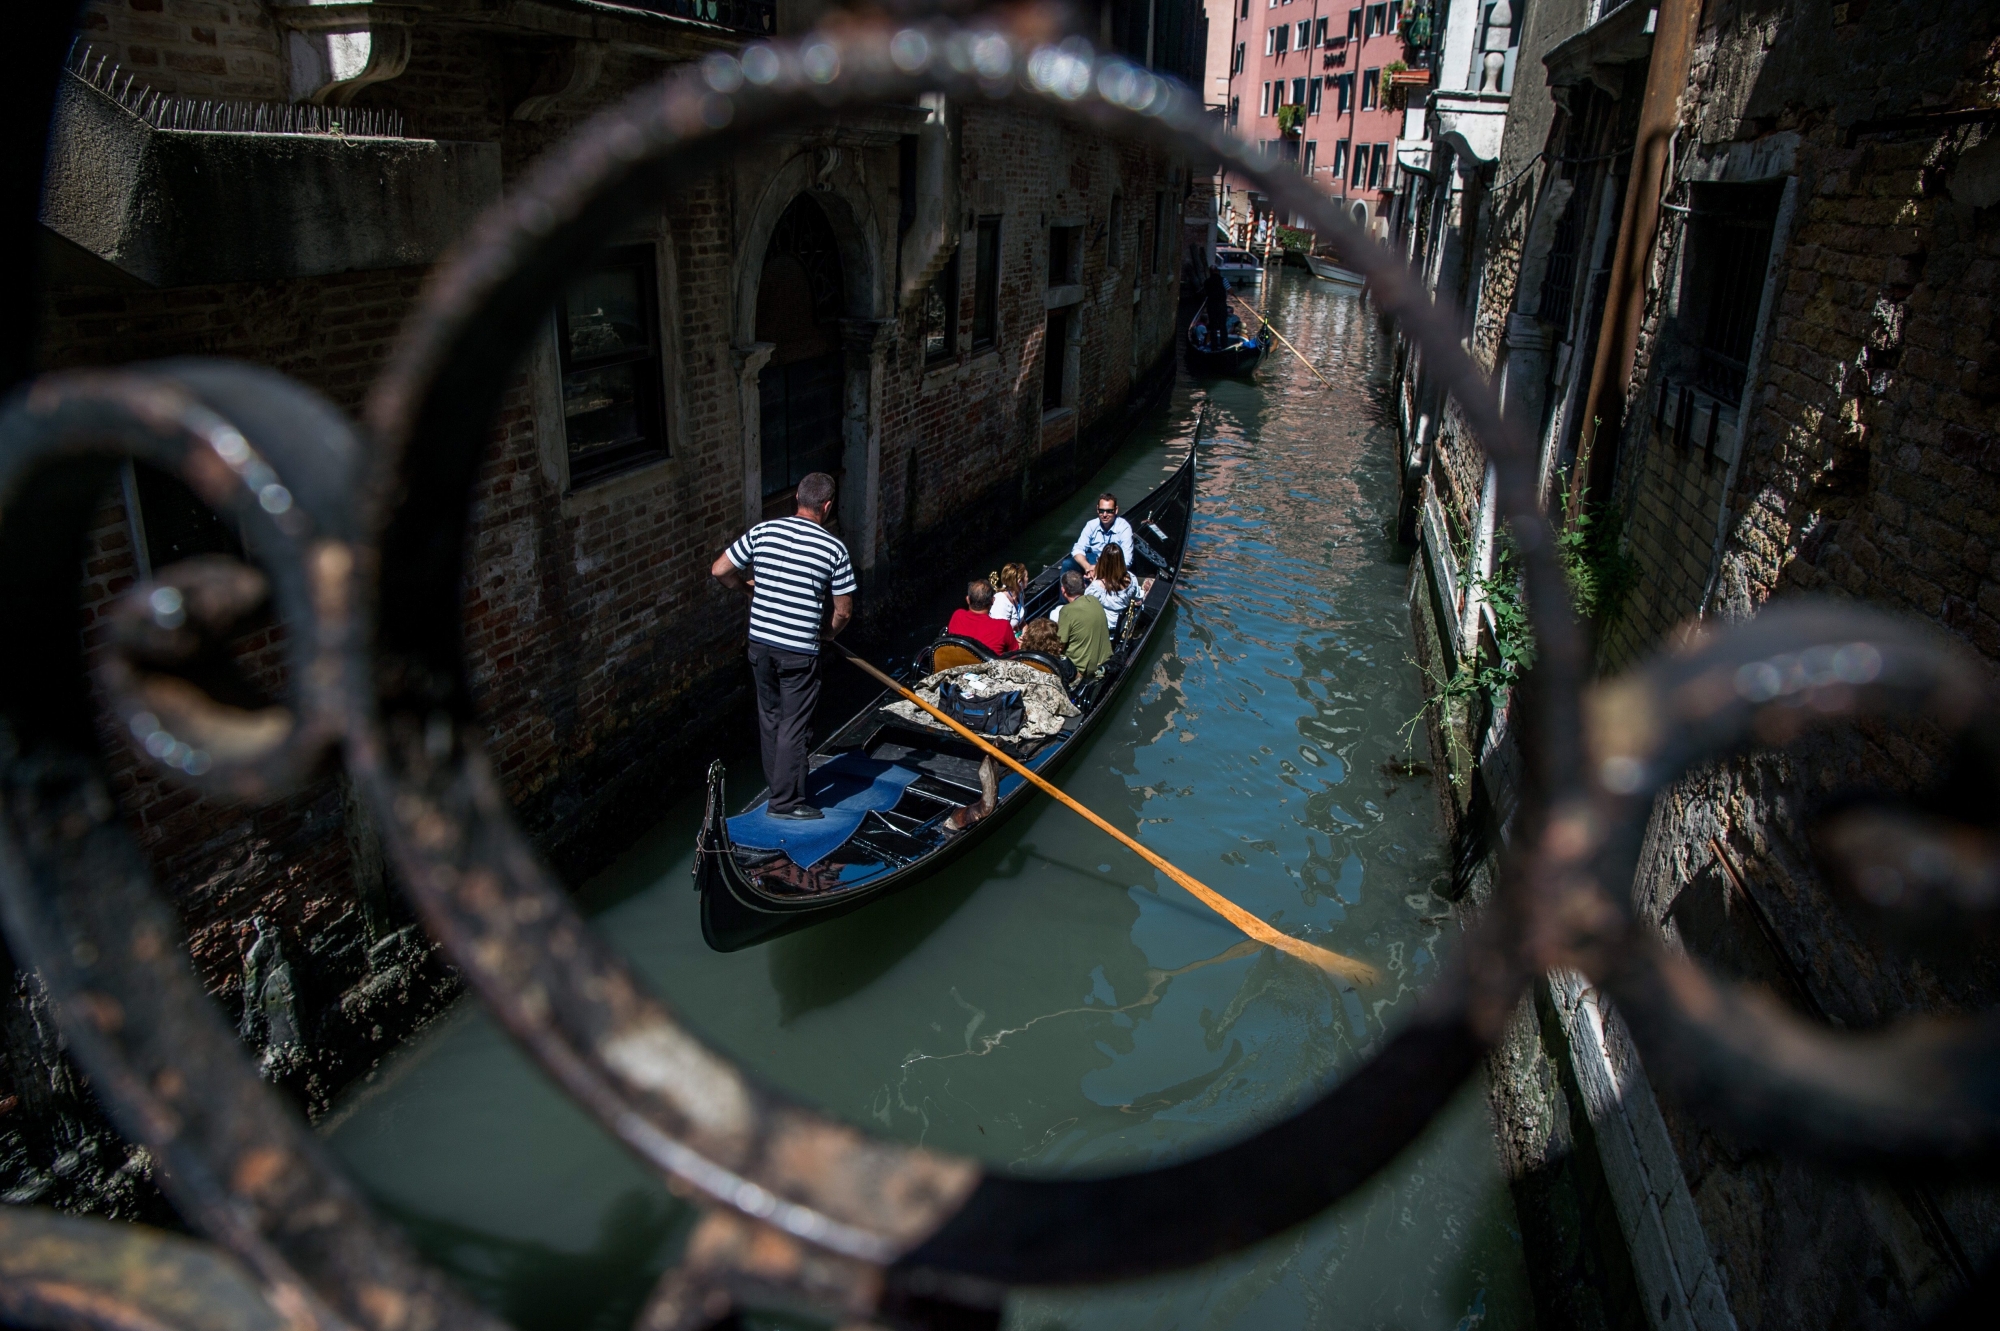 epa06764388 A gondola rider is seen in a canal of Venice, Italy, 25 May 2018. According to reports, some 30 million tourists visited the most popular tourism city in 2017 that revealed plans to curb the numbers of visitors per day.  EPA/Zoltan Balogh HUNGARY OUT ITALY TRAVEL VENICE TOURISM